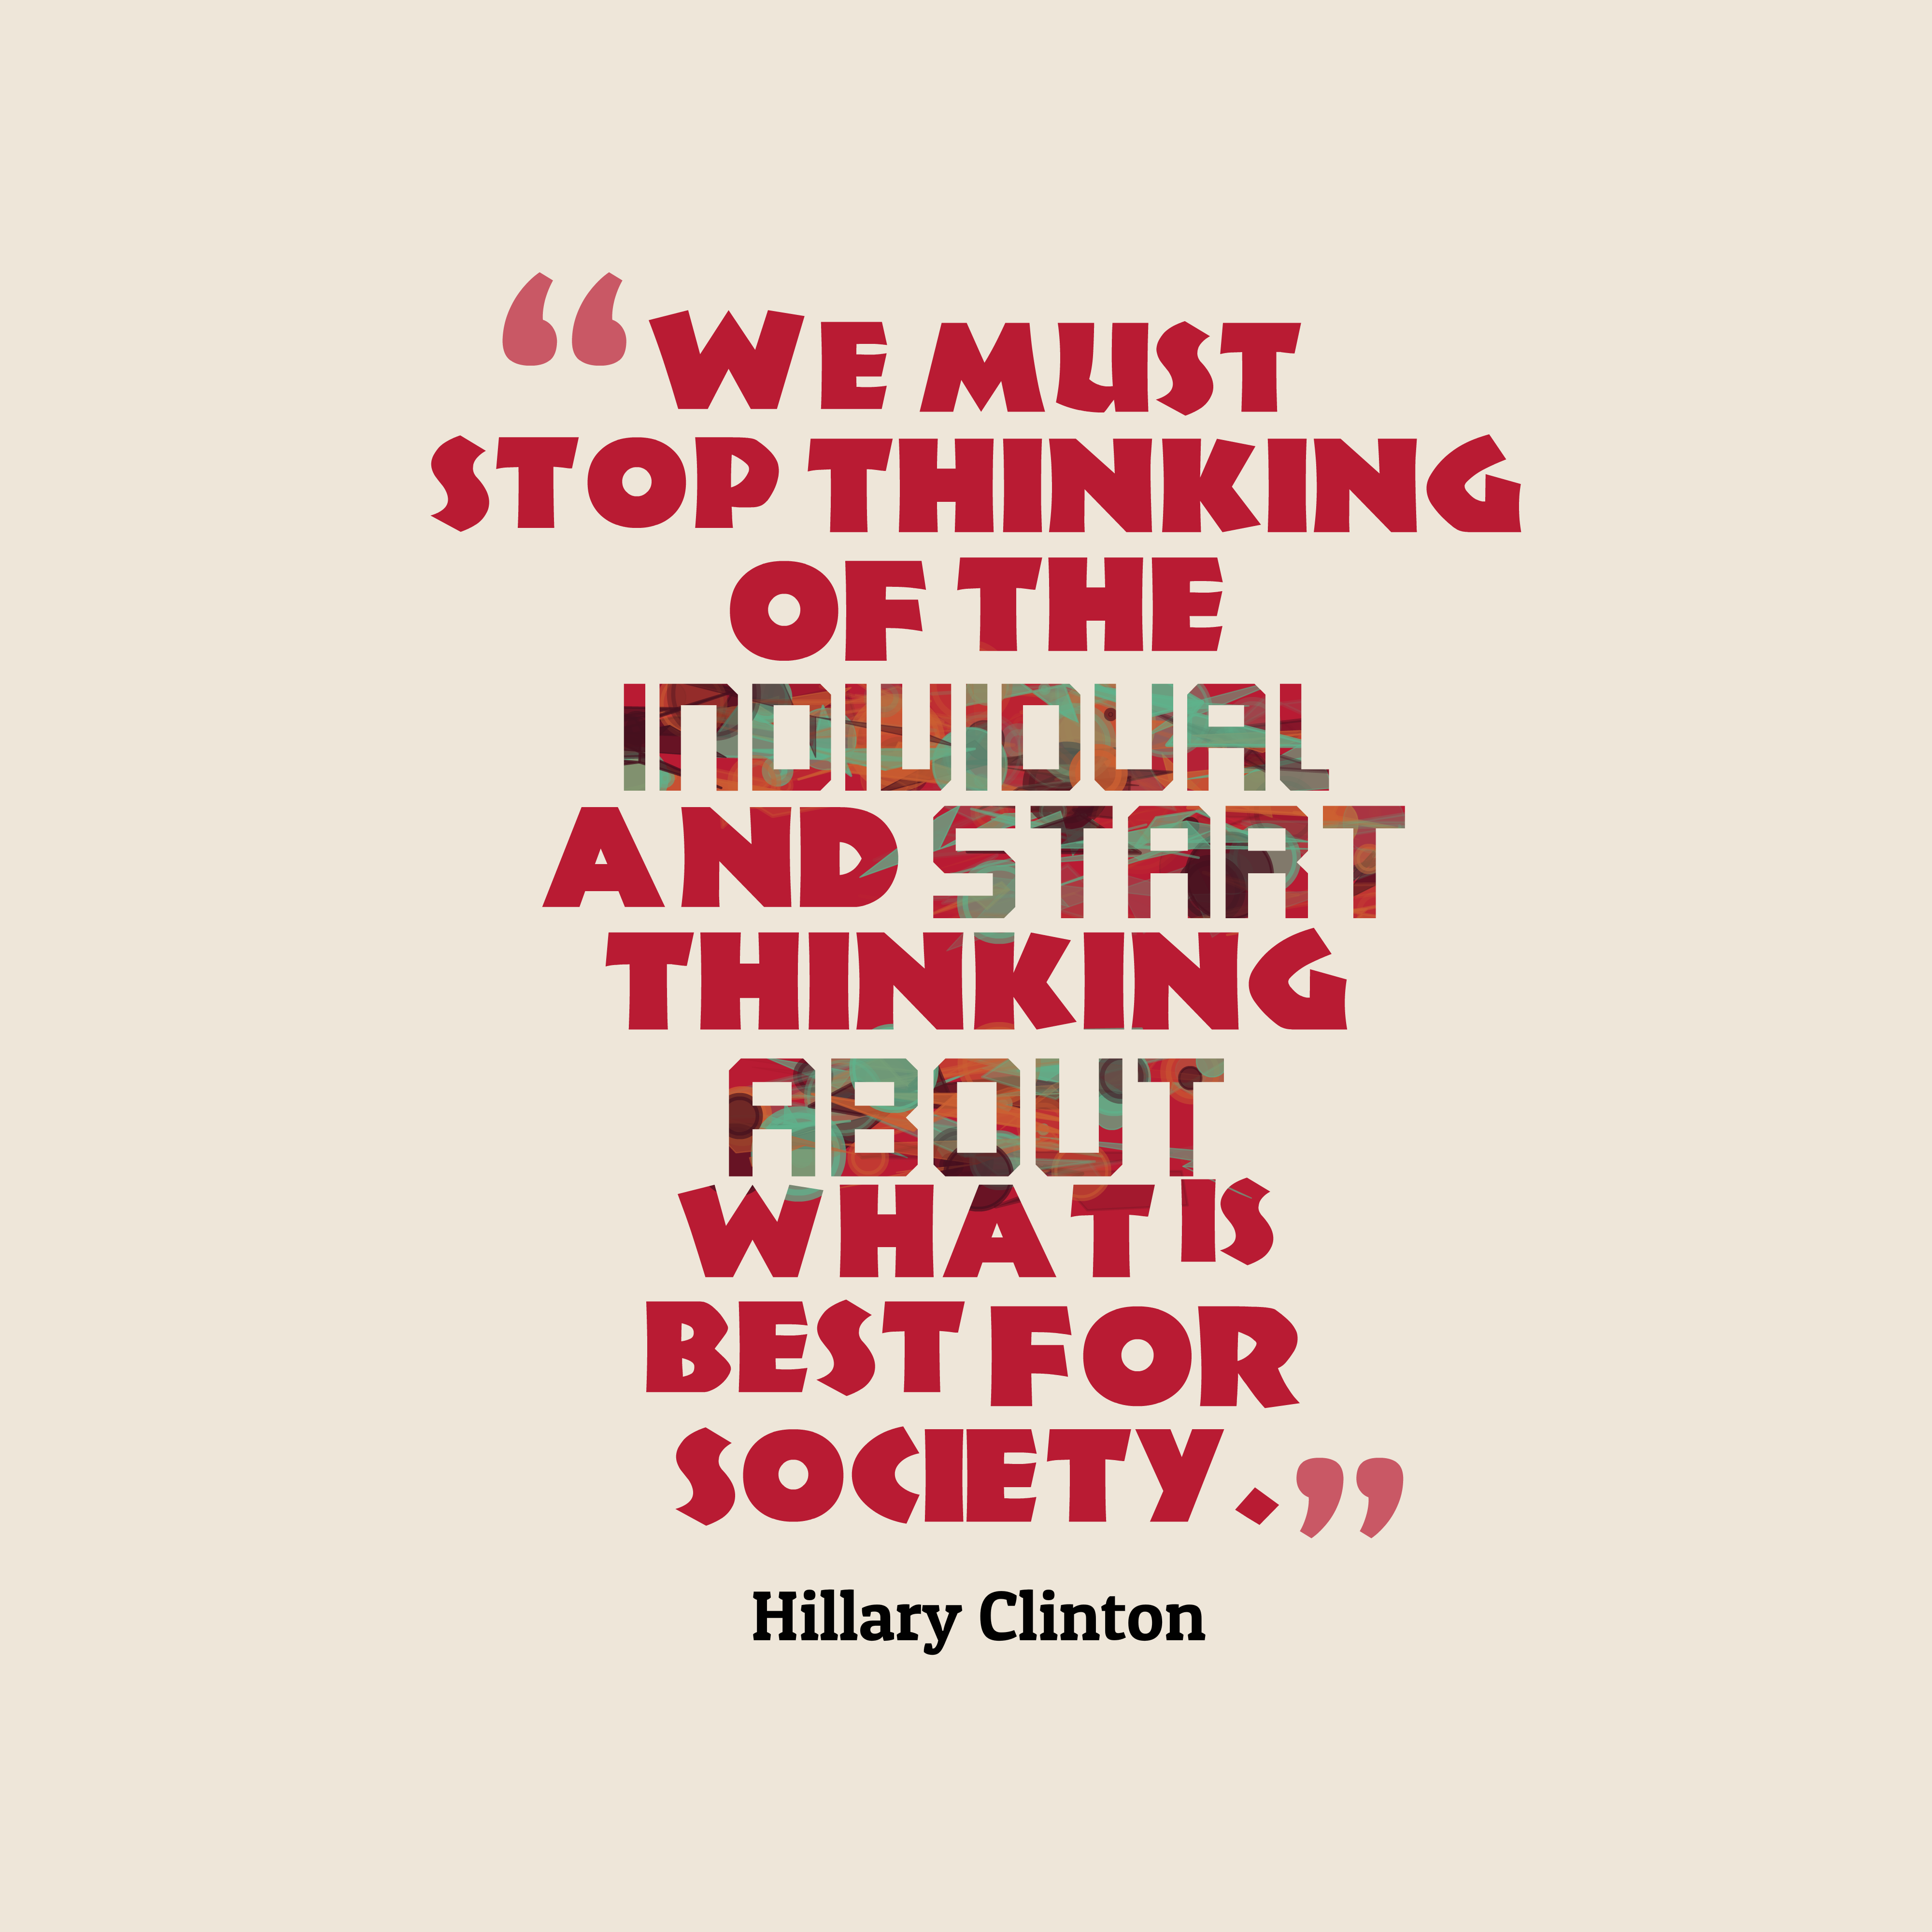 Quotes Image Of We Must Stop Thinking Of The Individual - Bruno Mars The Lazy Song - HD Wallpaper 